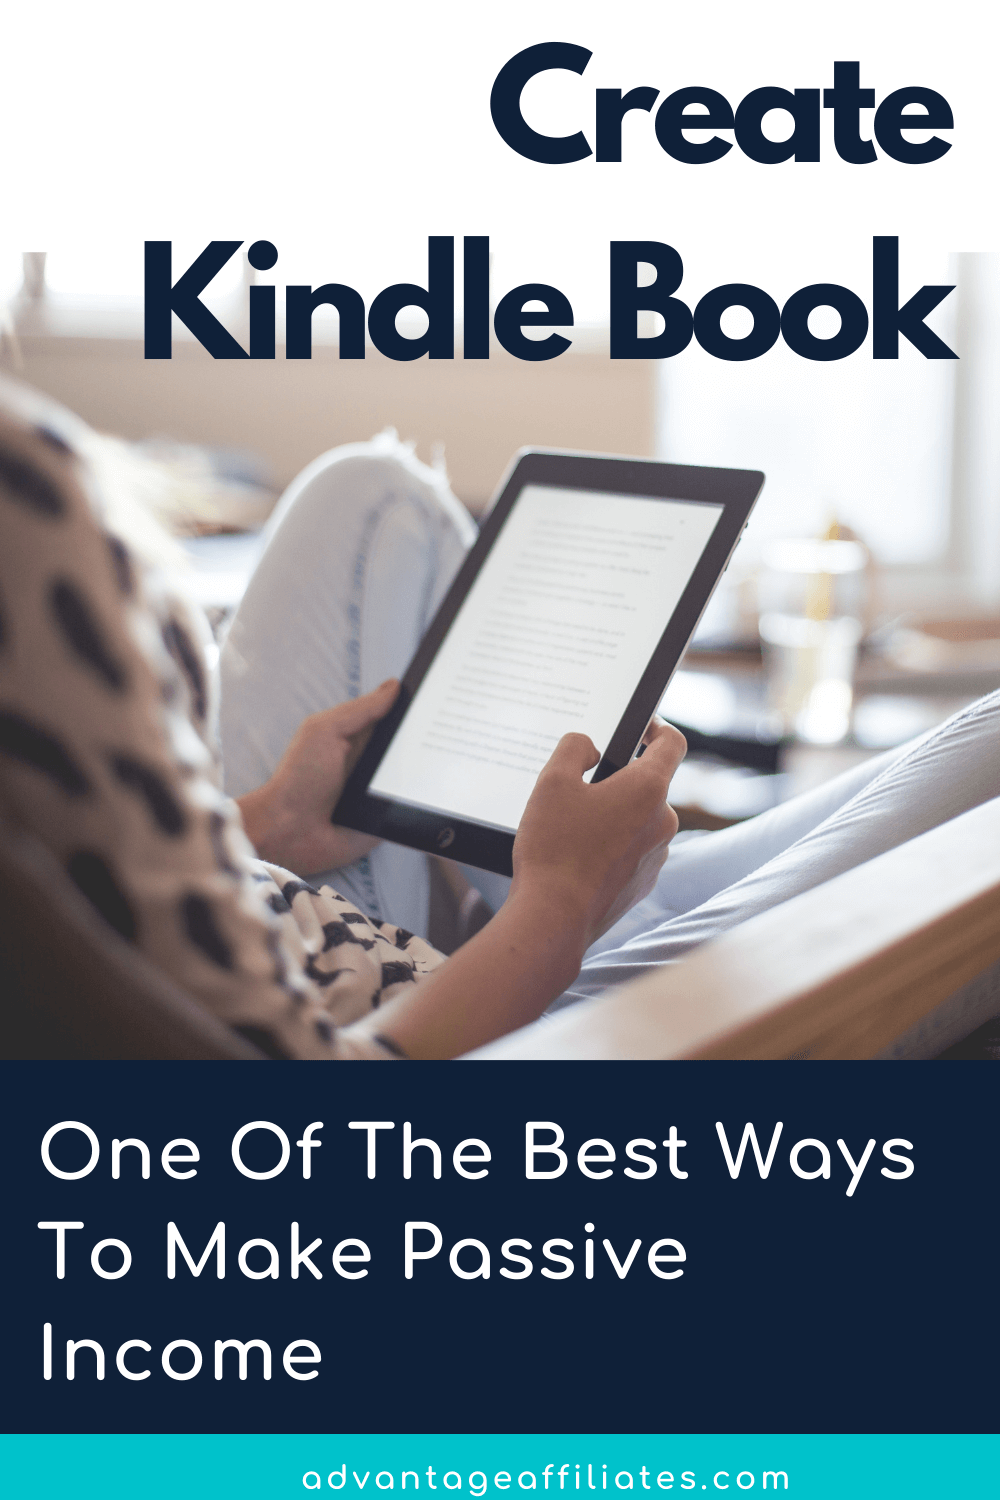 One Of The Best Ways To Make Passive Income_ Create Kindle Book (1)